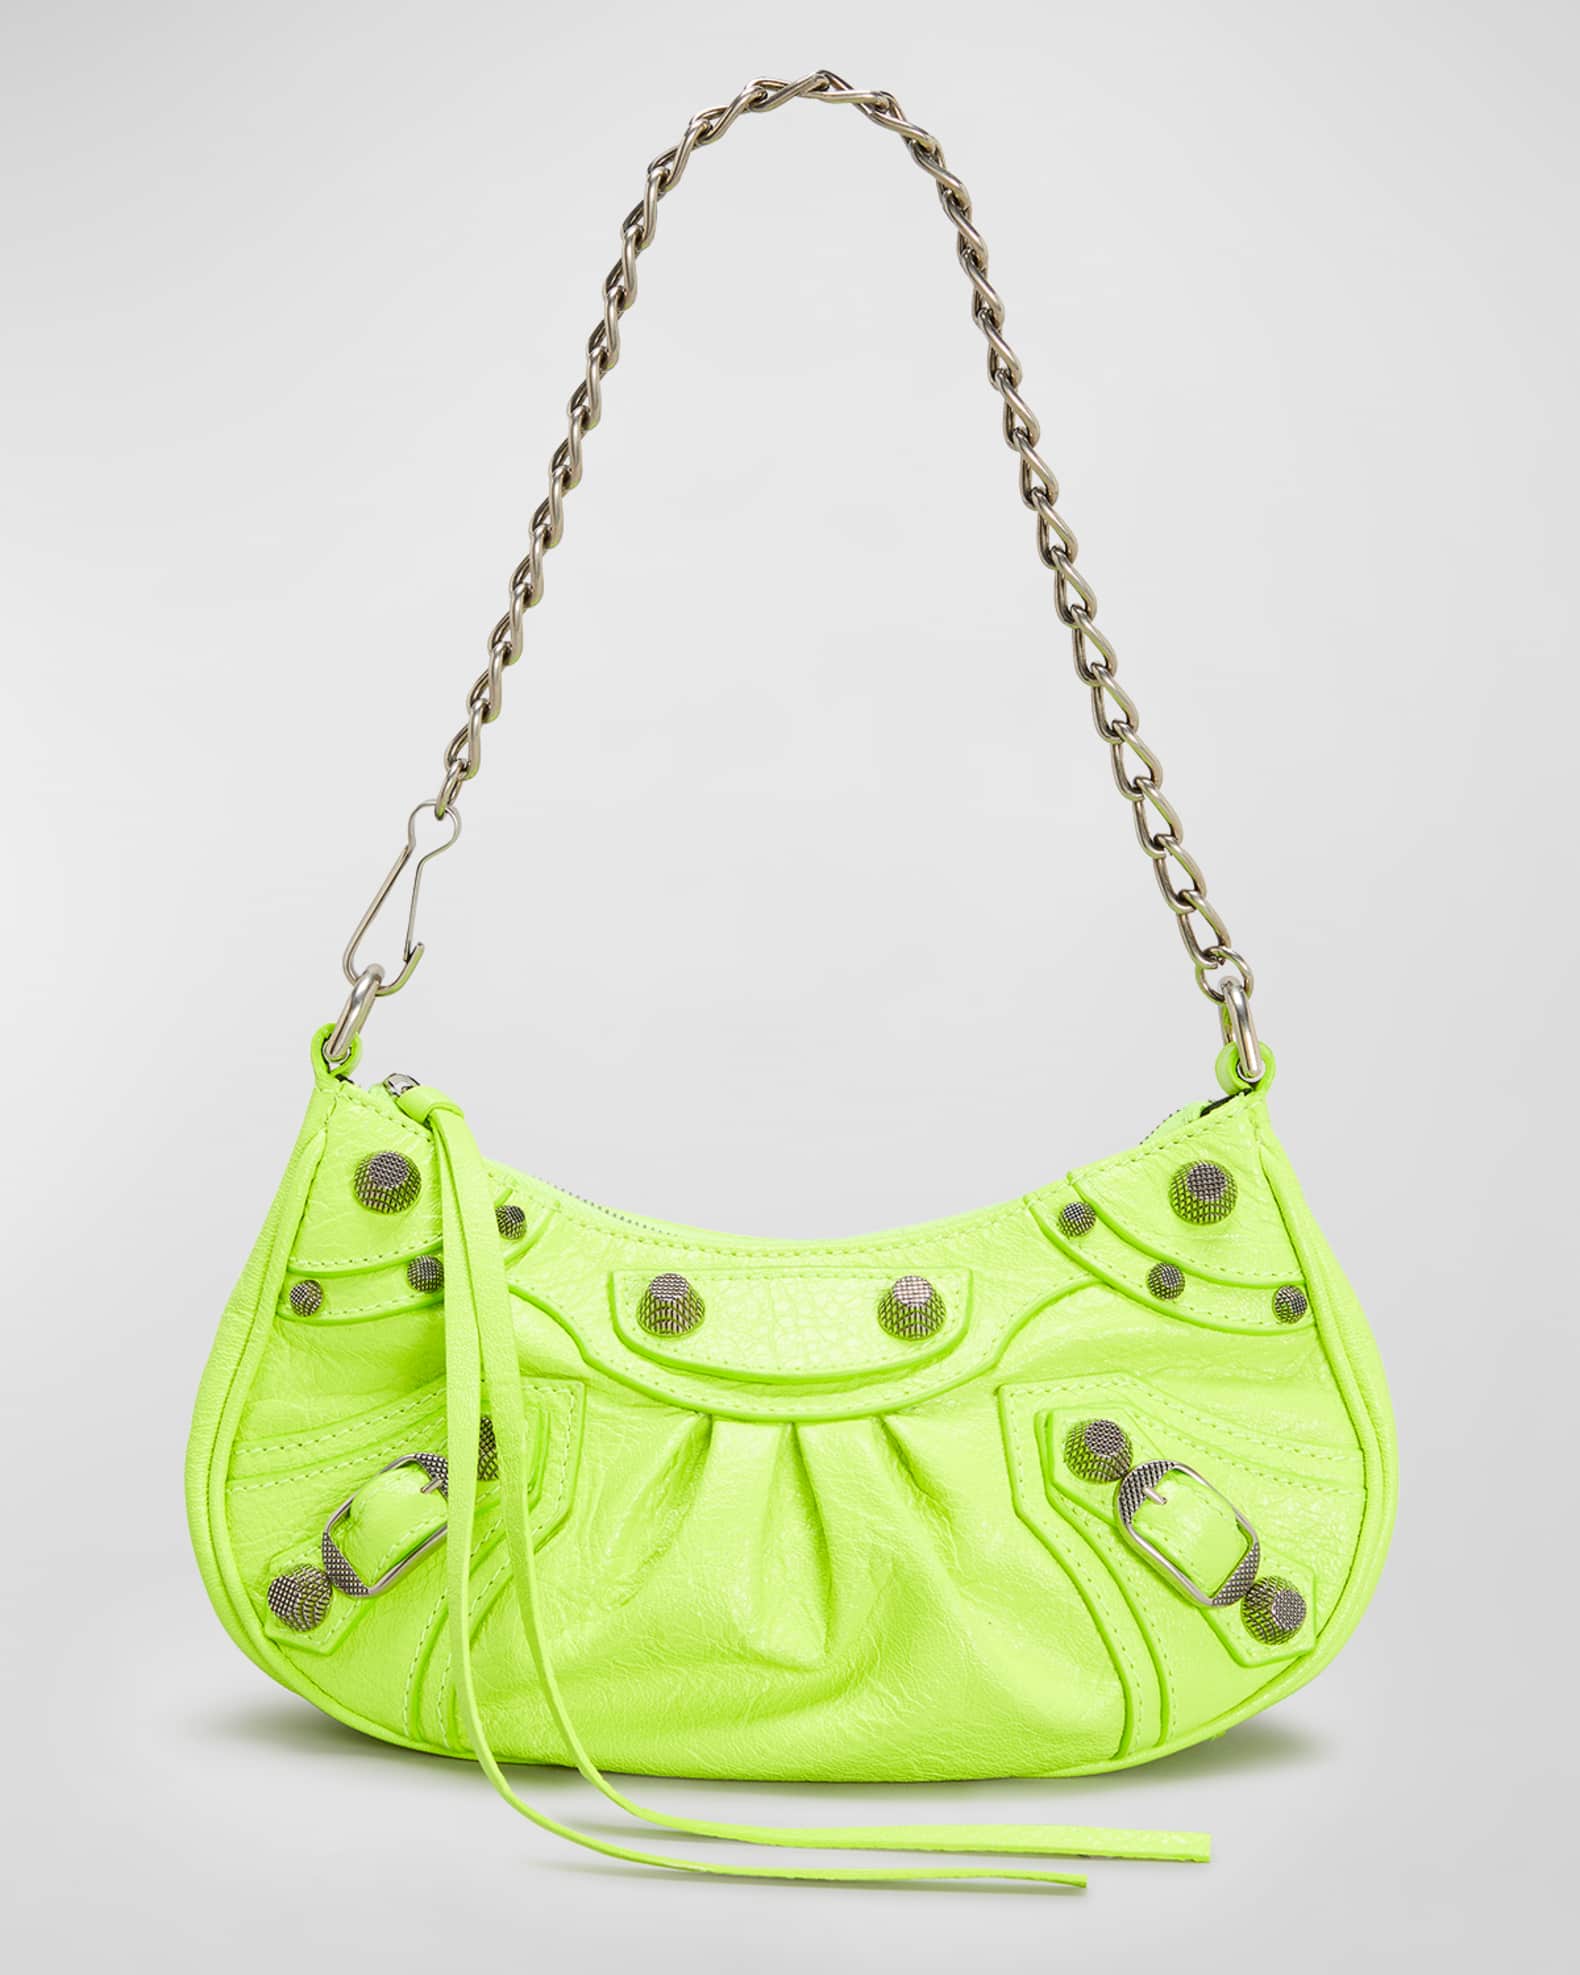 Balenciaga, Le Cagole Xs Studded Croc-effect Leather Shoulder Bag, Green, One size